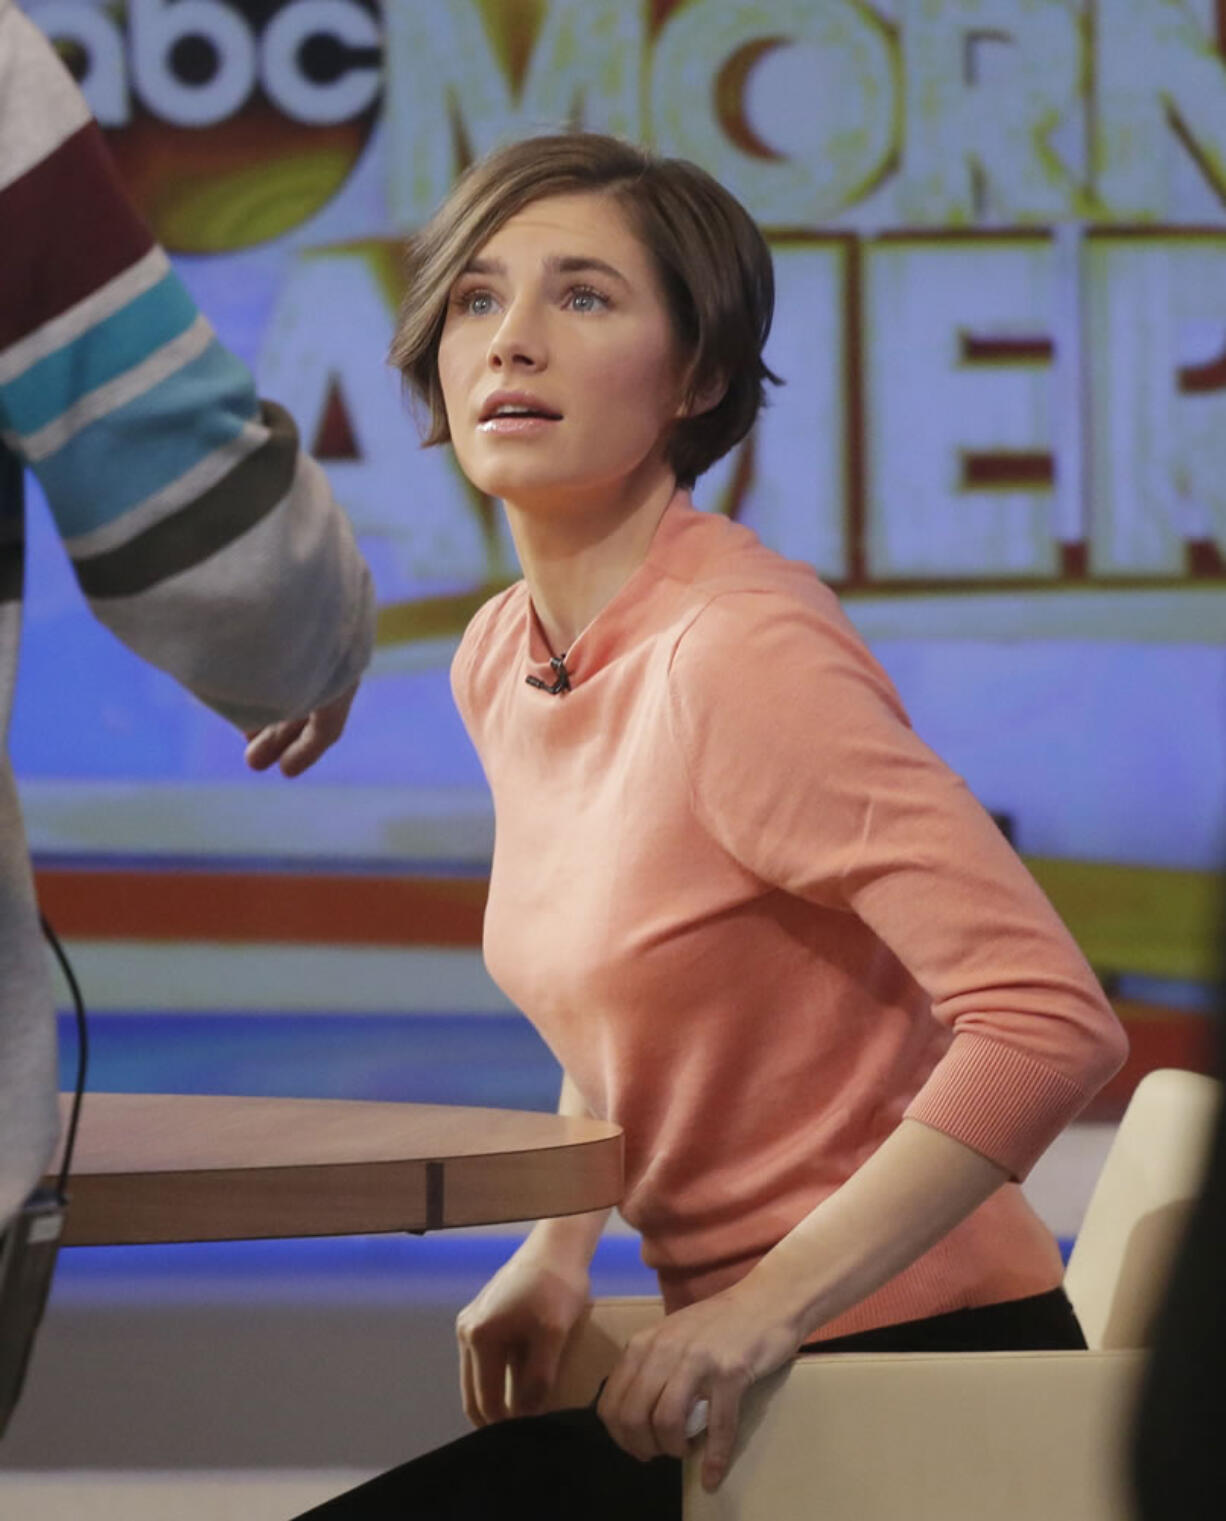 Amanda Knox prepares to leave the set following a television interview Friday in New York.